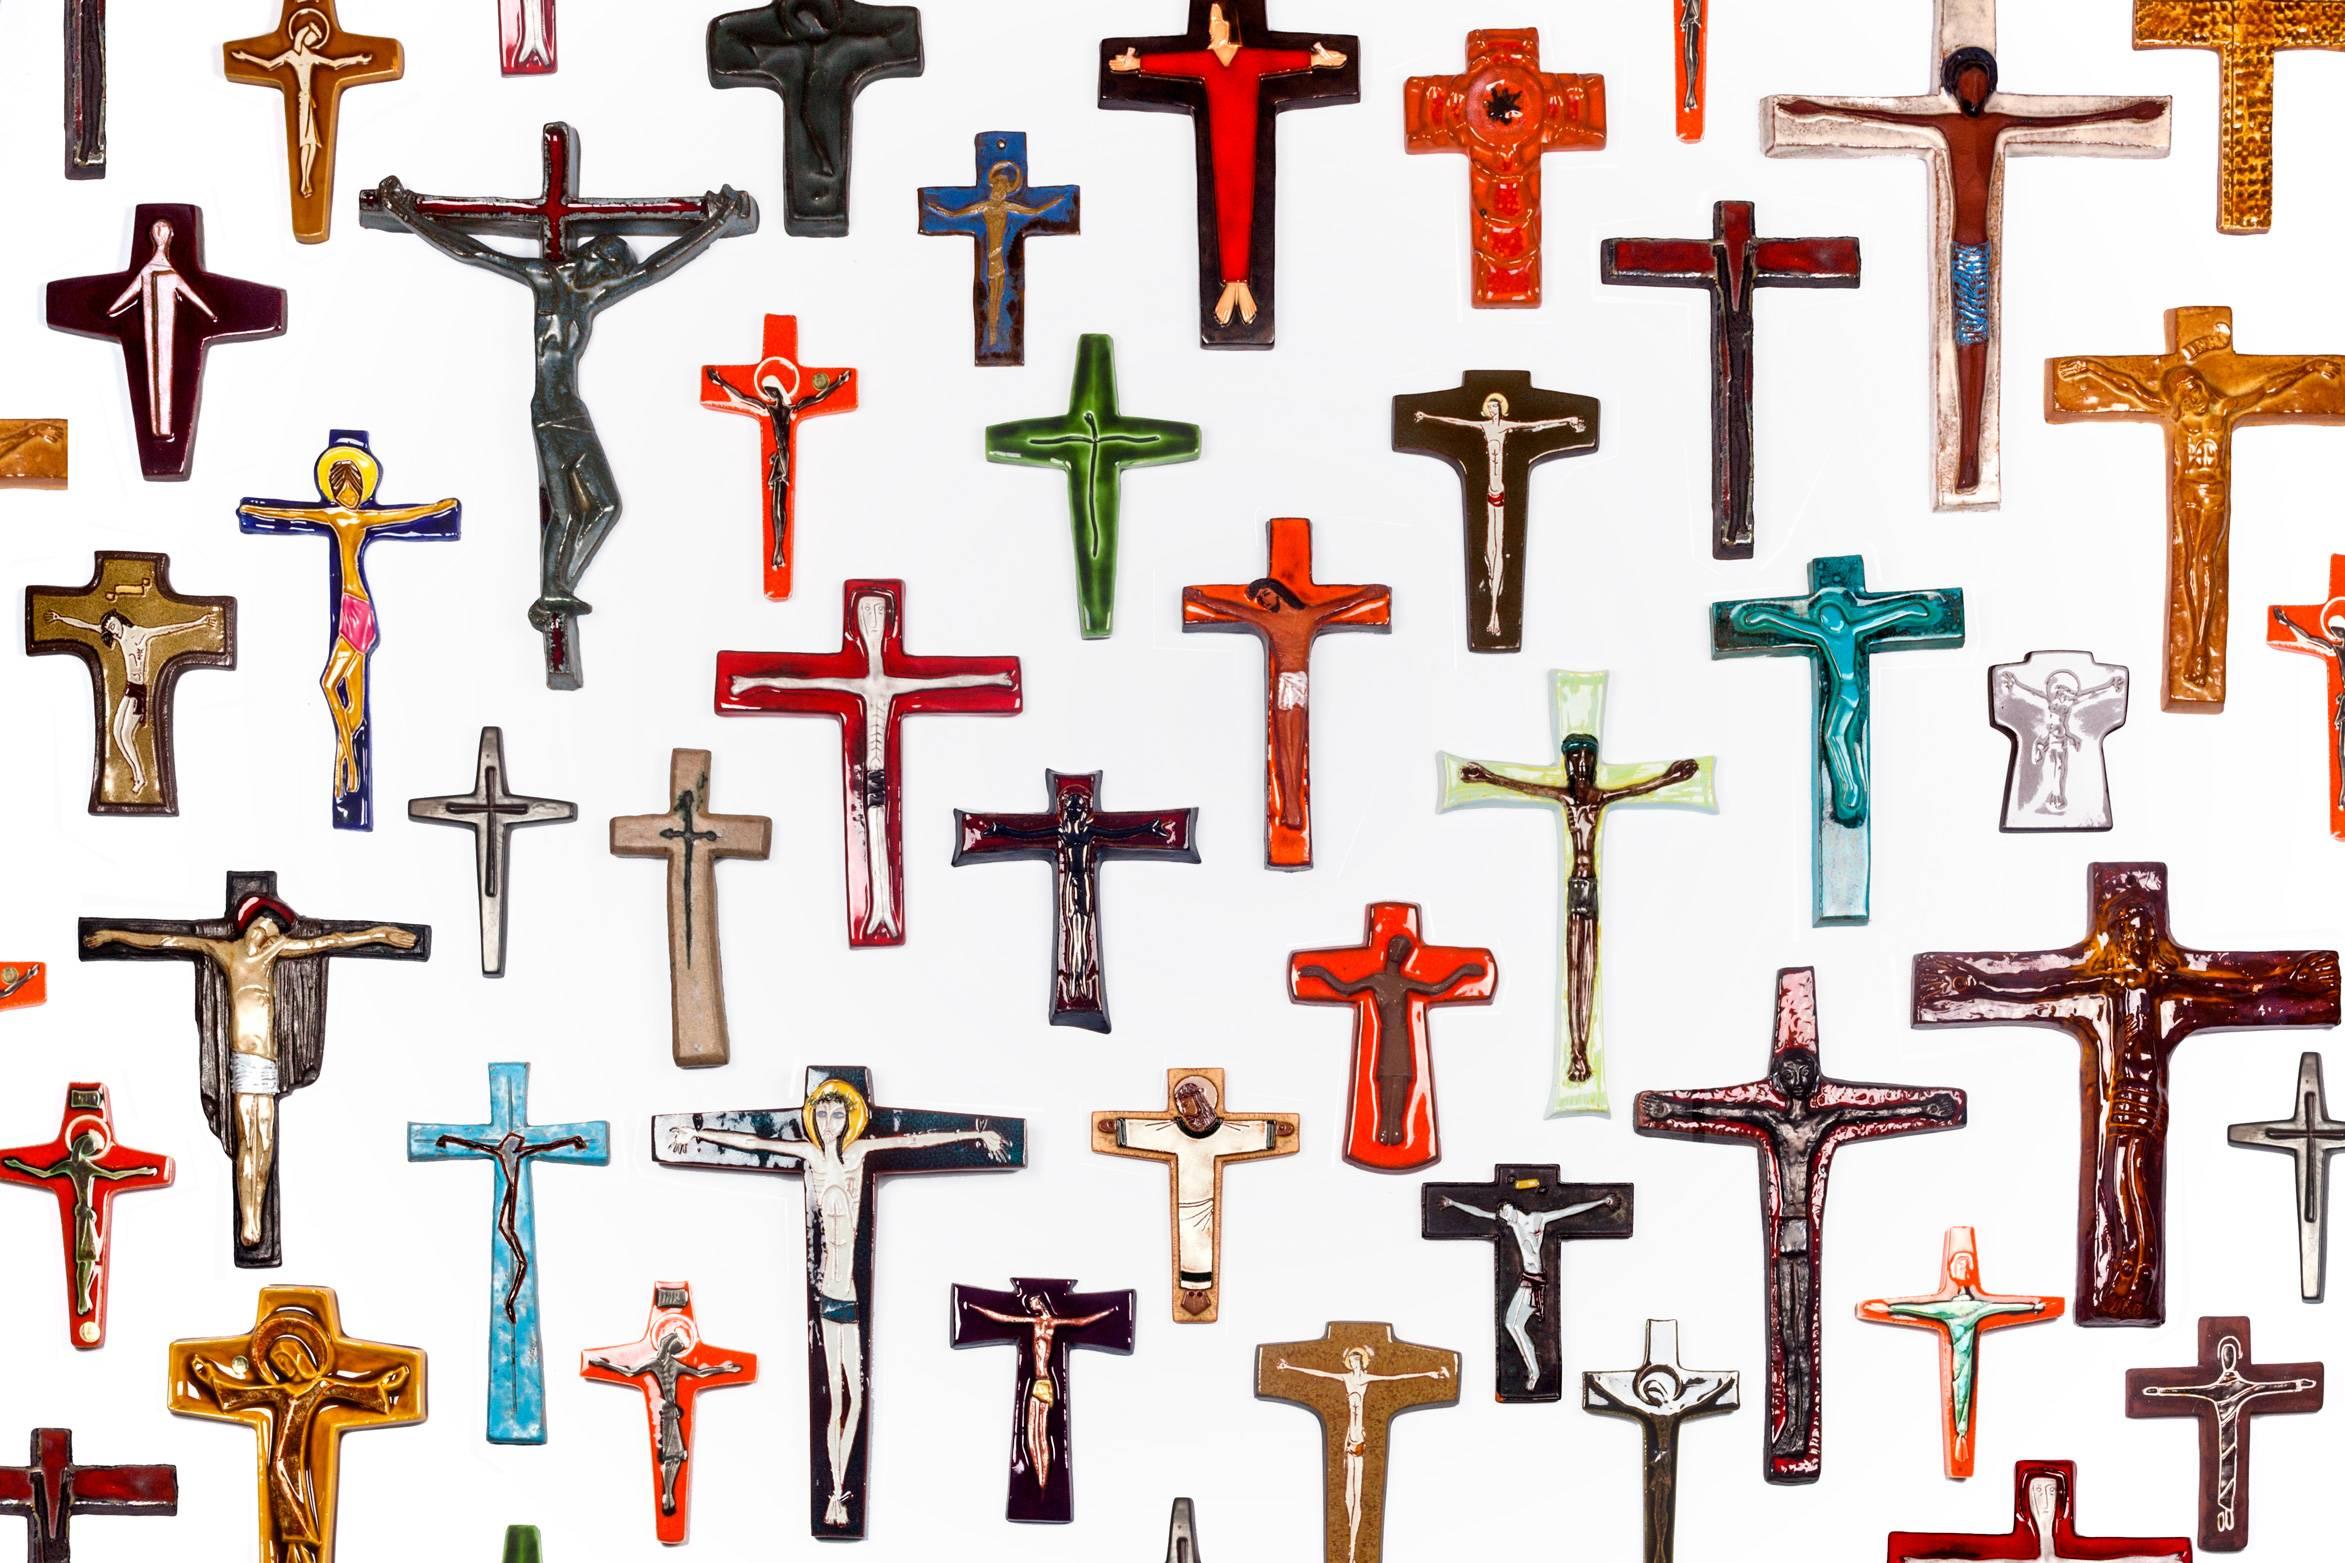 Ceramic wall cross, nearly eight inches tall, handmade in Belgium in the 1970s. Hand-painted in orange and black with white contours and finished in a high-gloss glaze. 

This piece is part of a 69-piece ceramic crucifix collection, all handmade